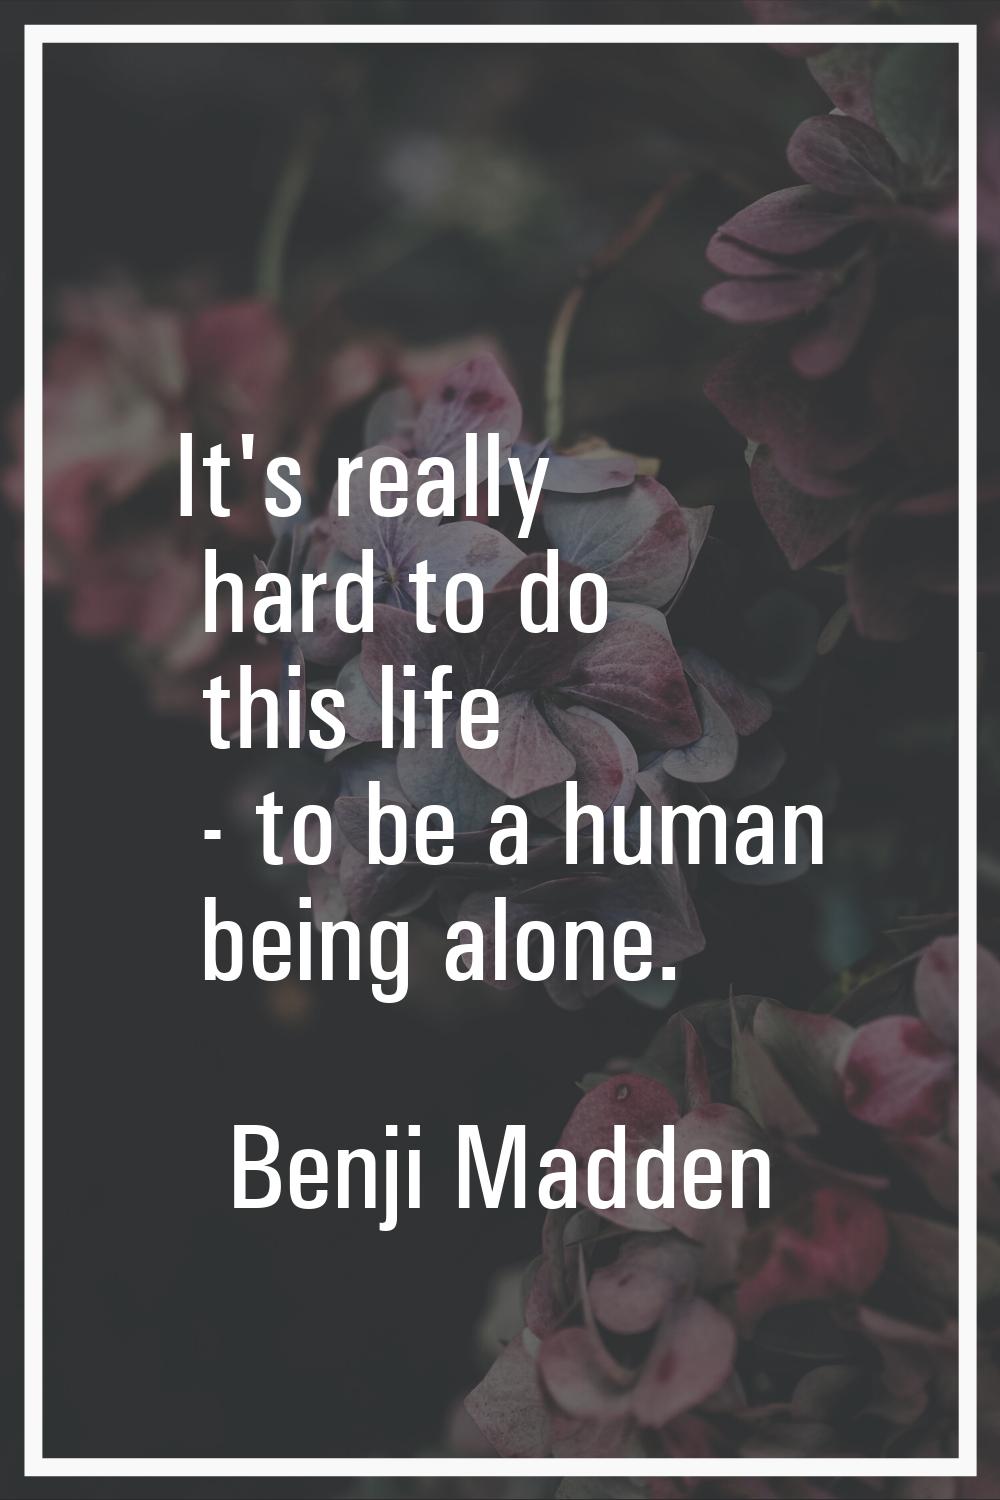 It's really hard to do this life - to be a human being alone.